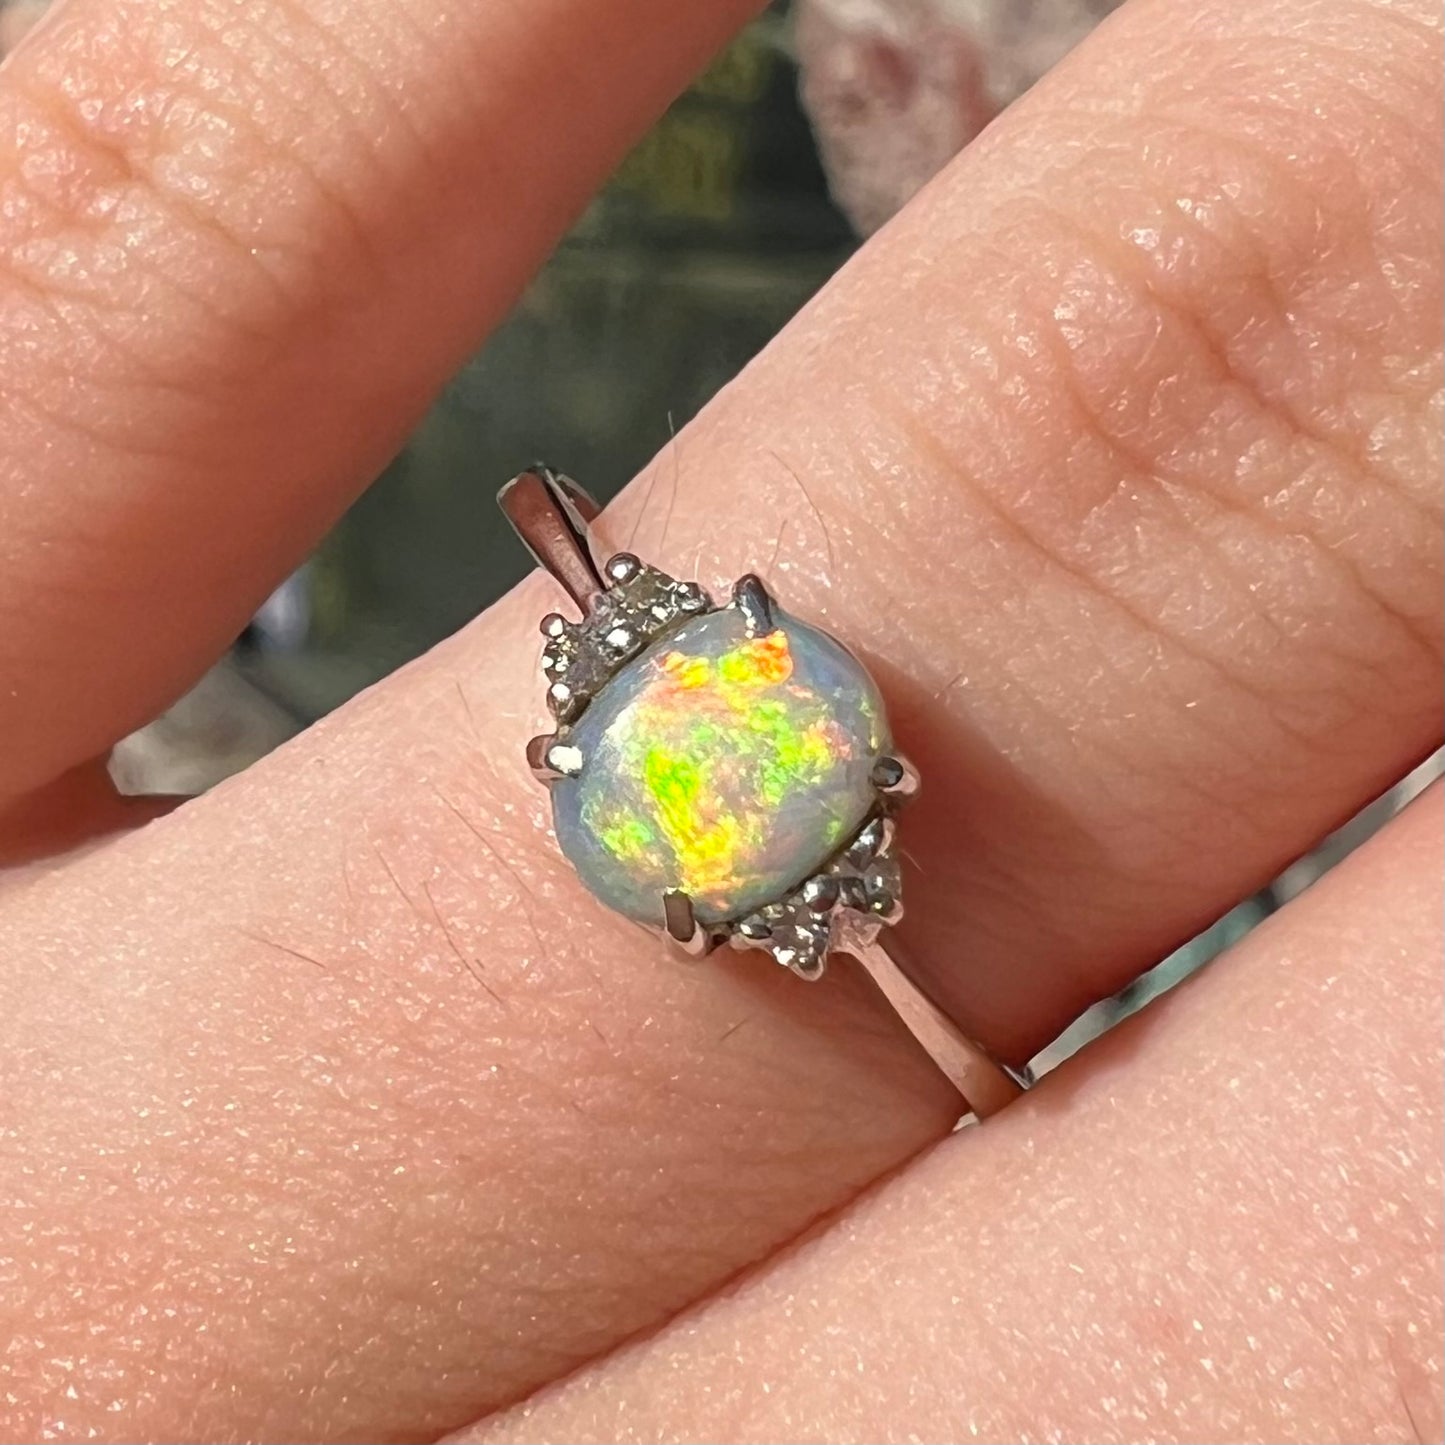 A ladies' white gold opal and diamond ring.  The opal shines orange, yellow, and green colors.